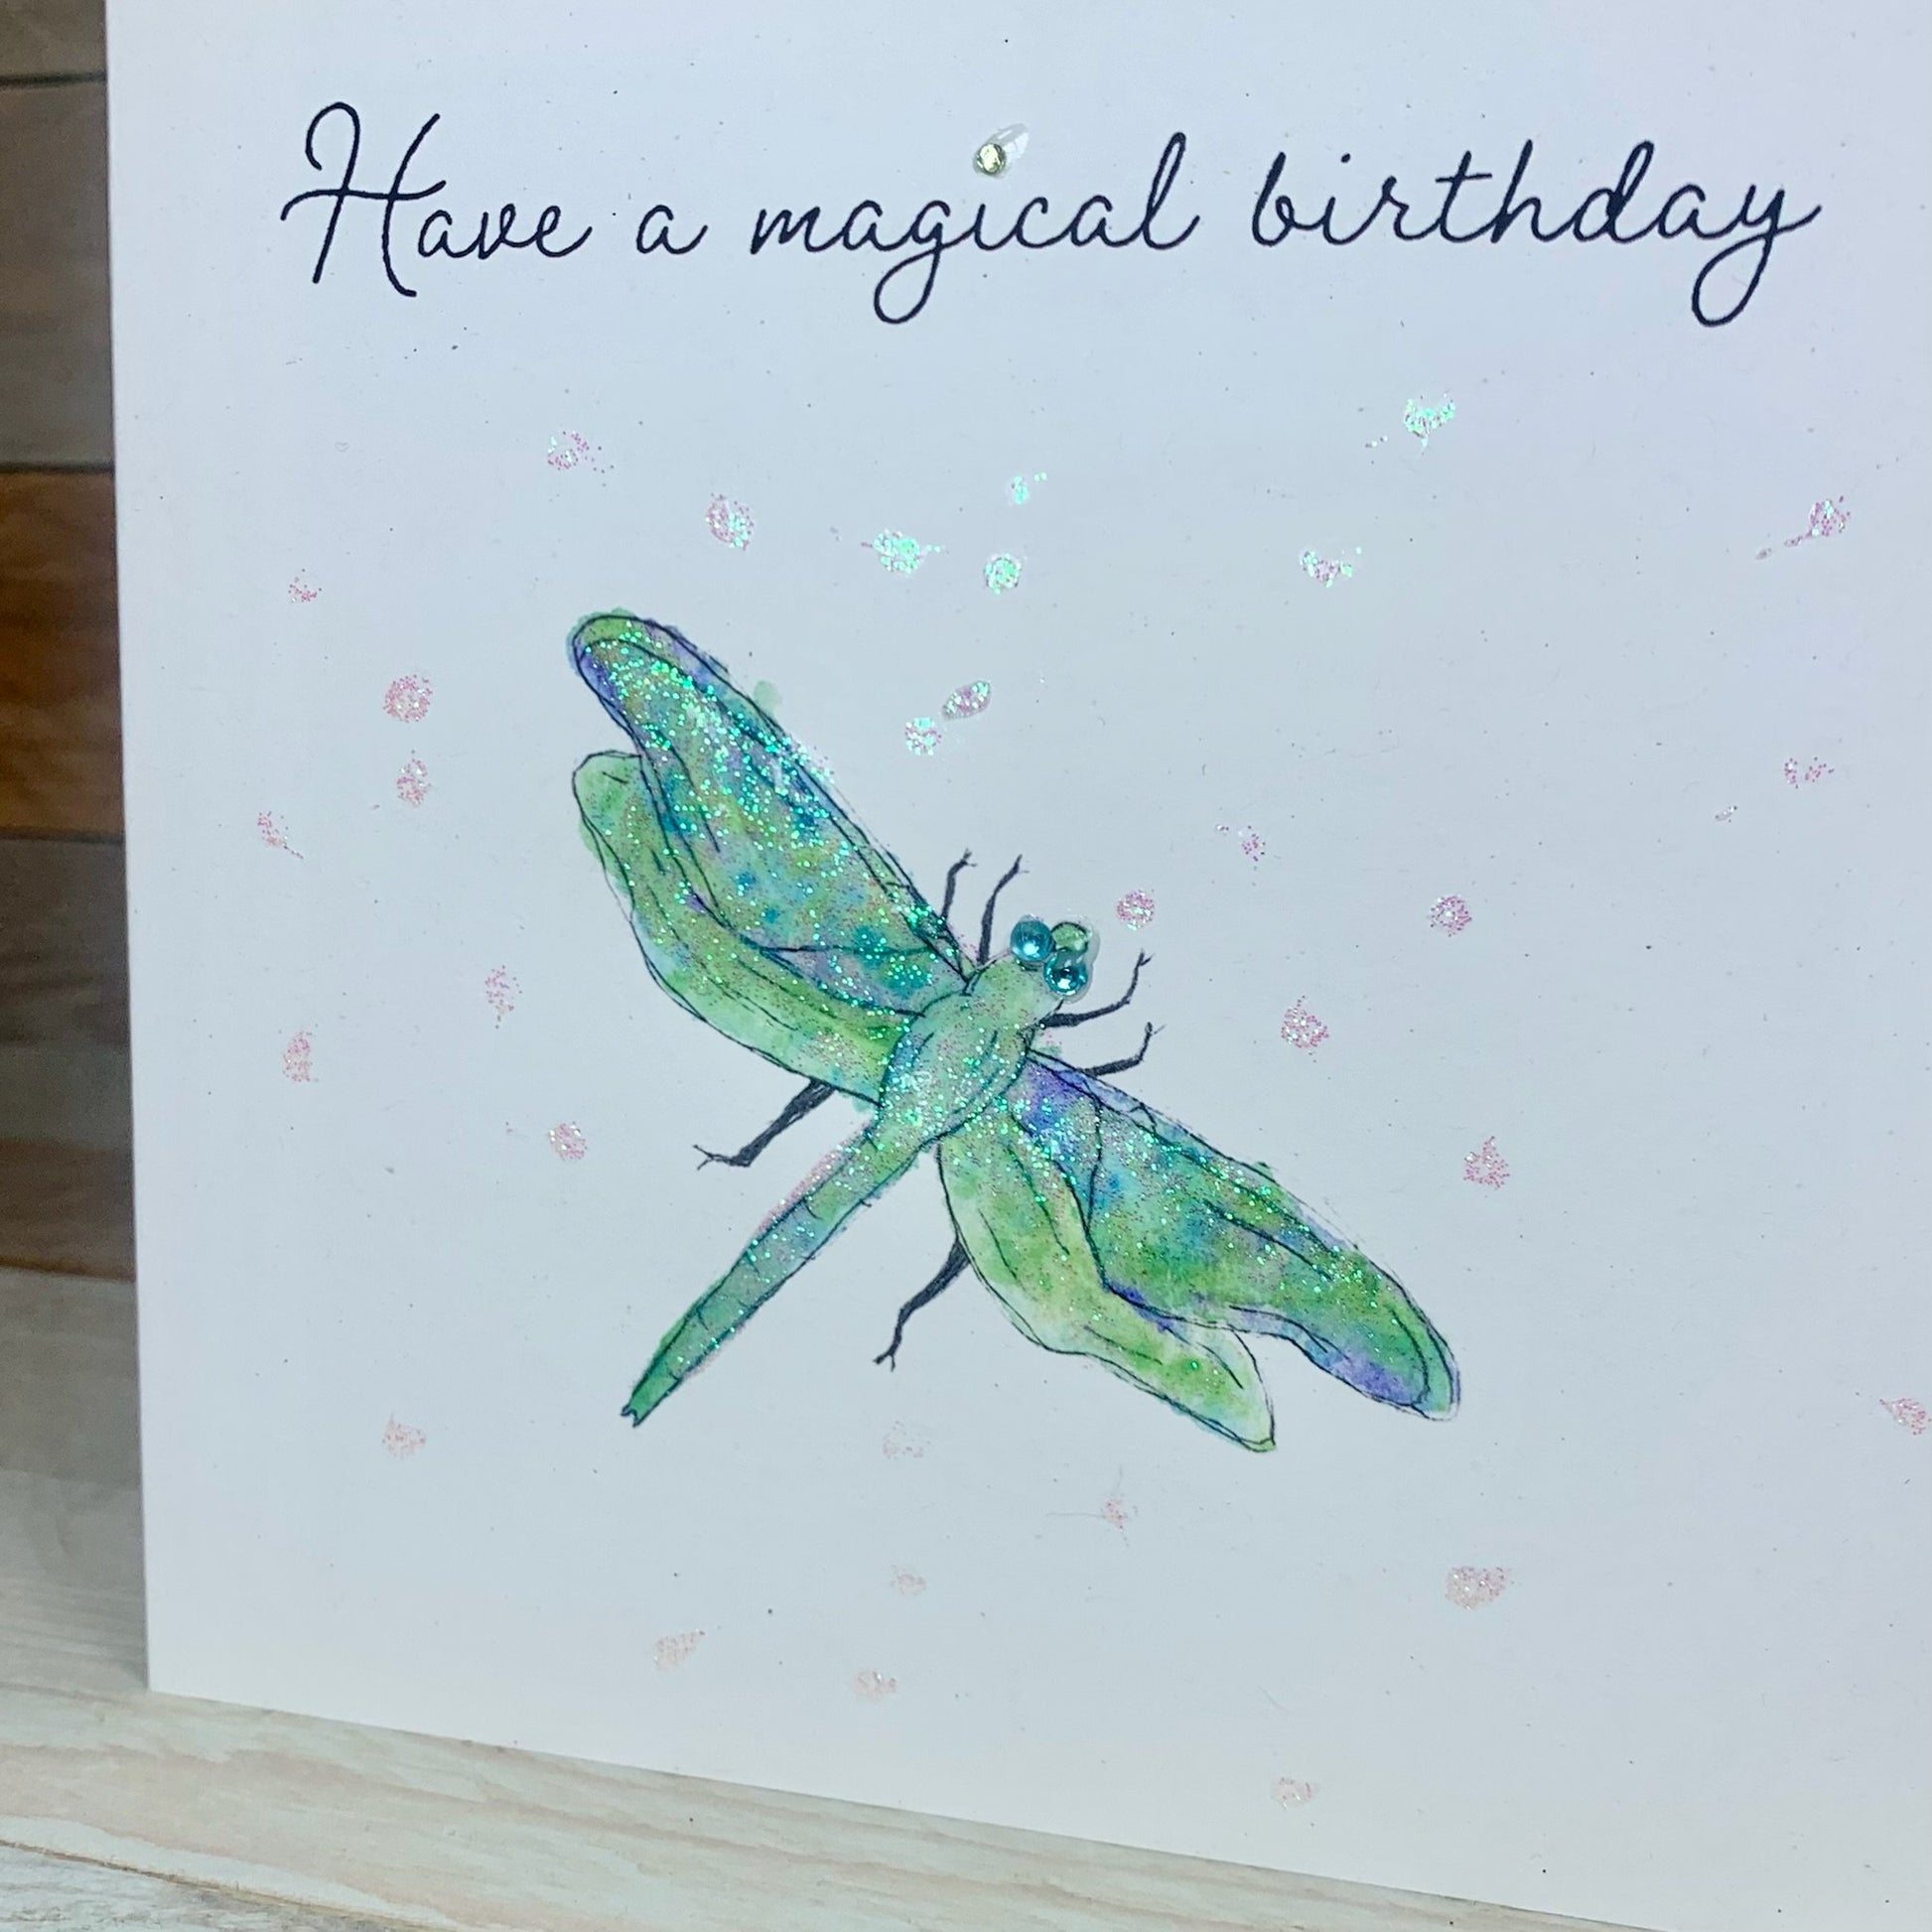 Dragonfly Magical Birthday card - Arty Bee Designs 